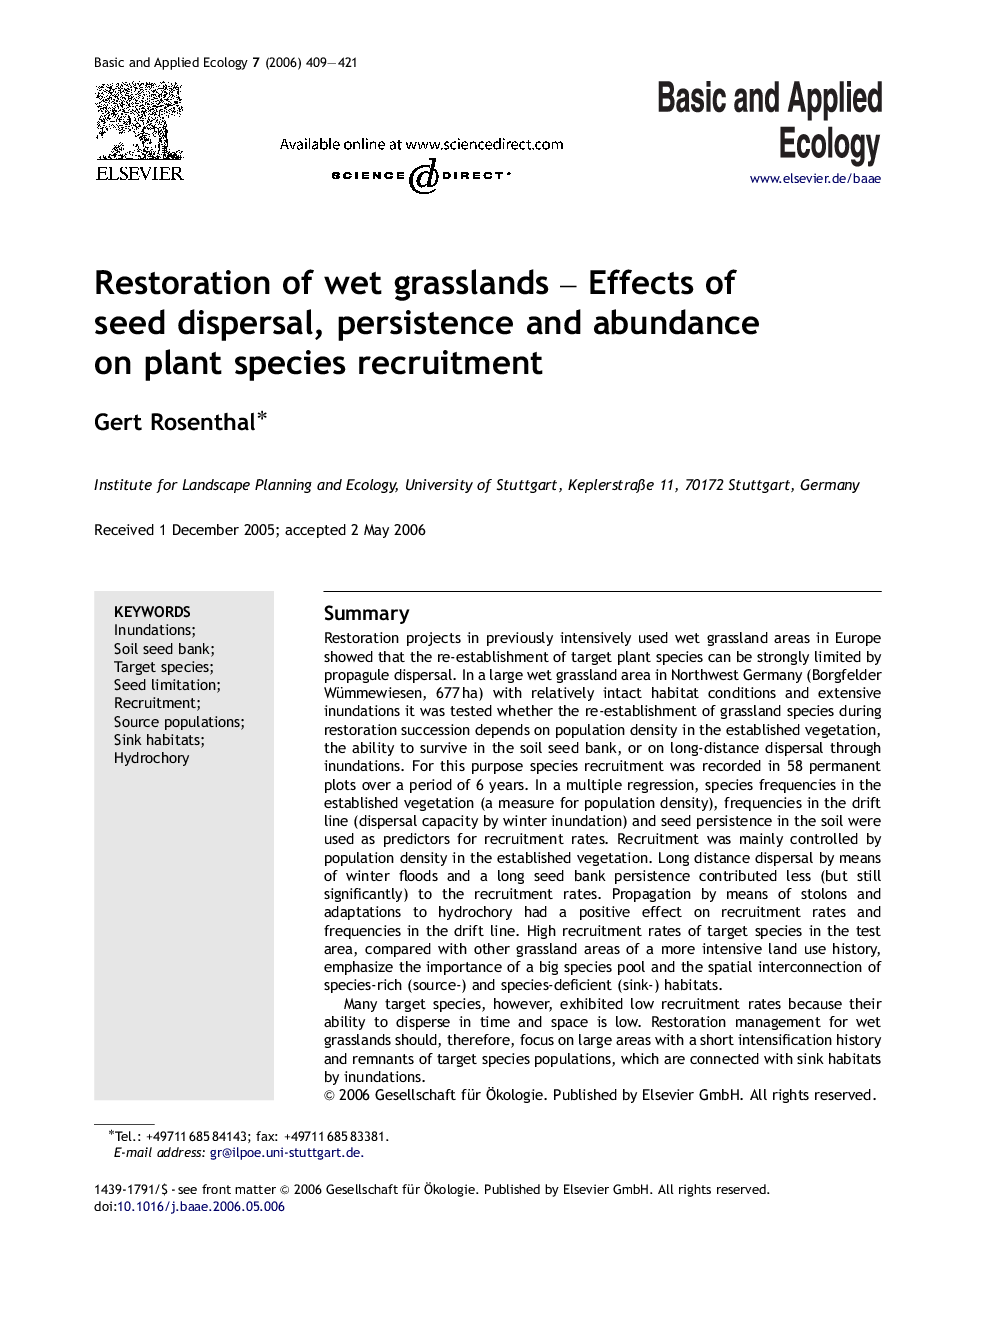 Restoration of wet grasslands – Effects of seed dispersal, persistence and abundance on plant species recruitment